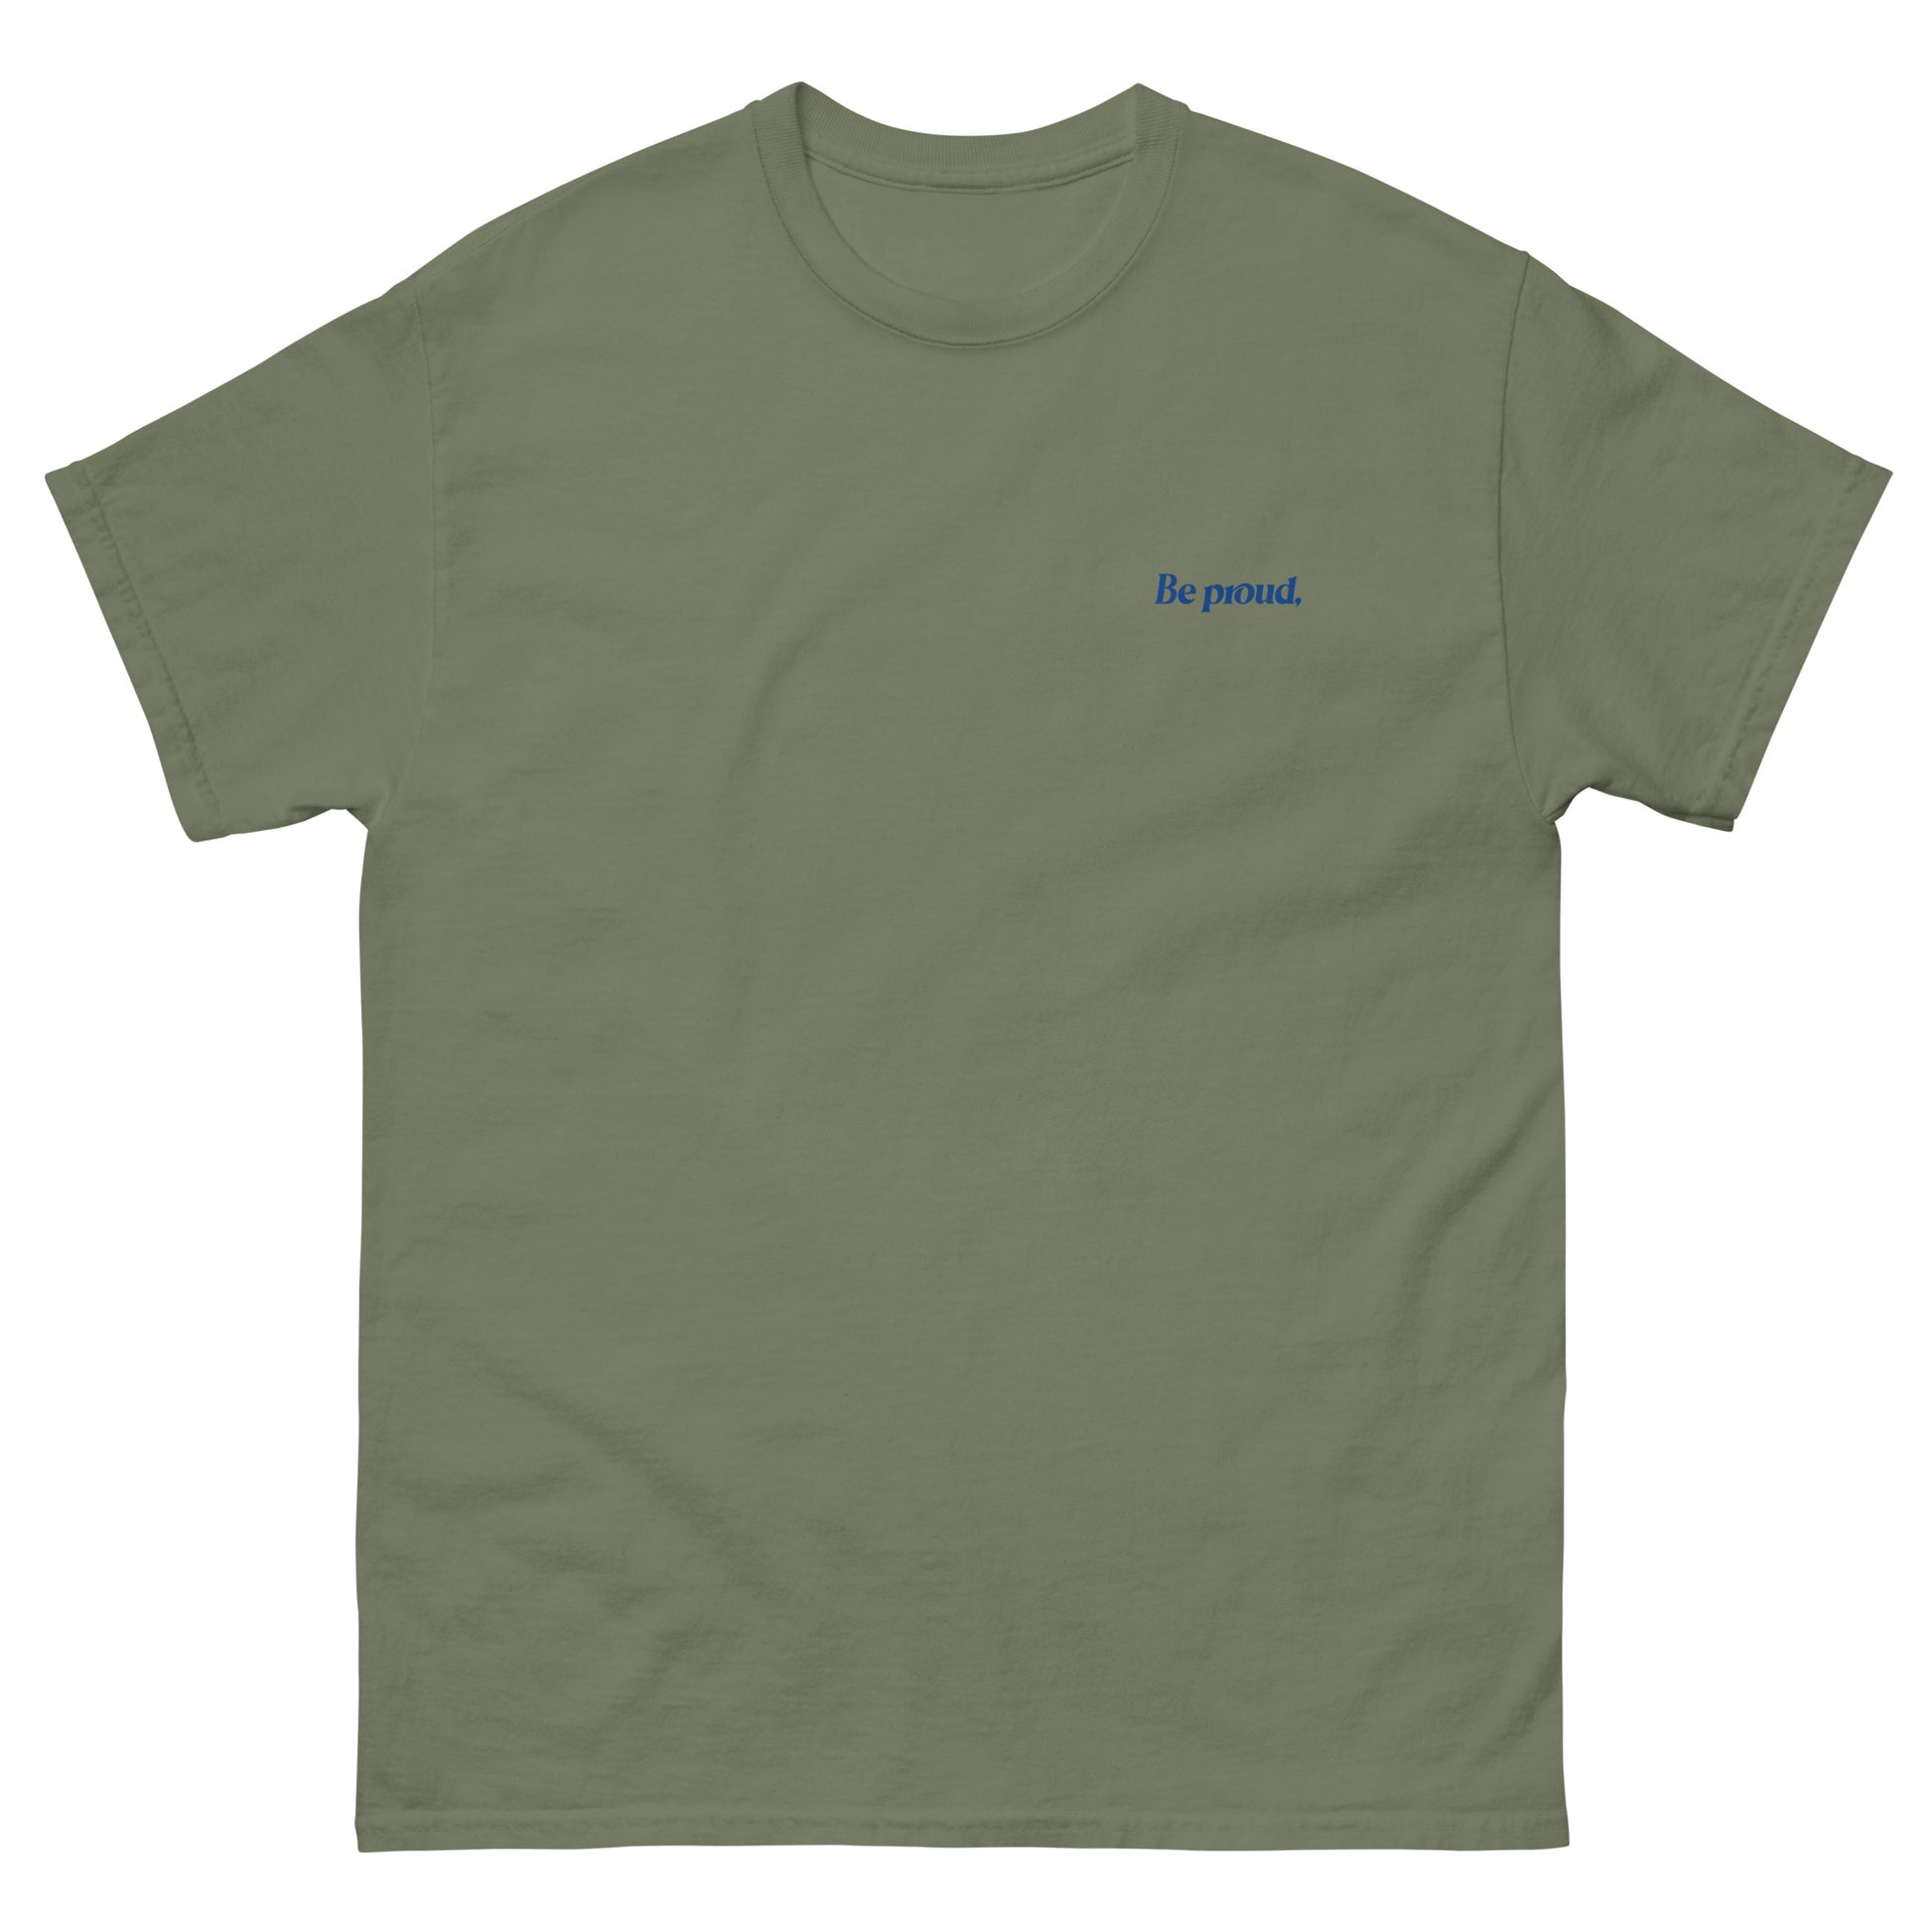 Green High Quality Tee - Front Design with "Be proud, " print on left chest - Back Design with a Phrase "Be proud, you survived the days you thought you couldn't." print